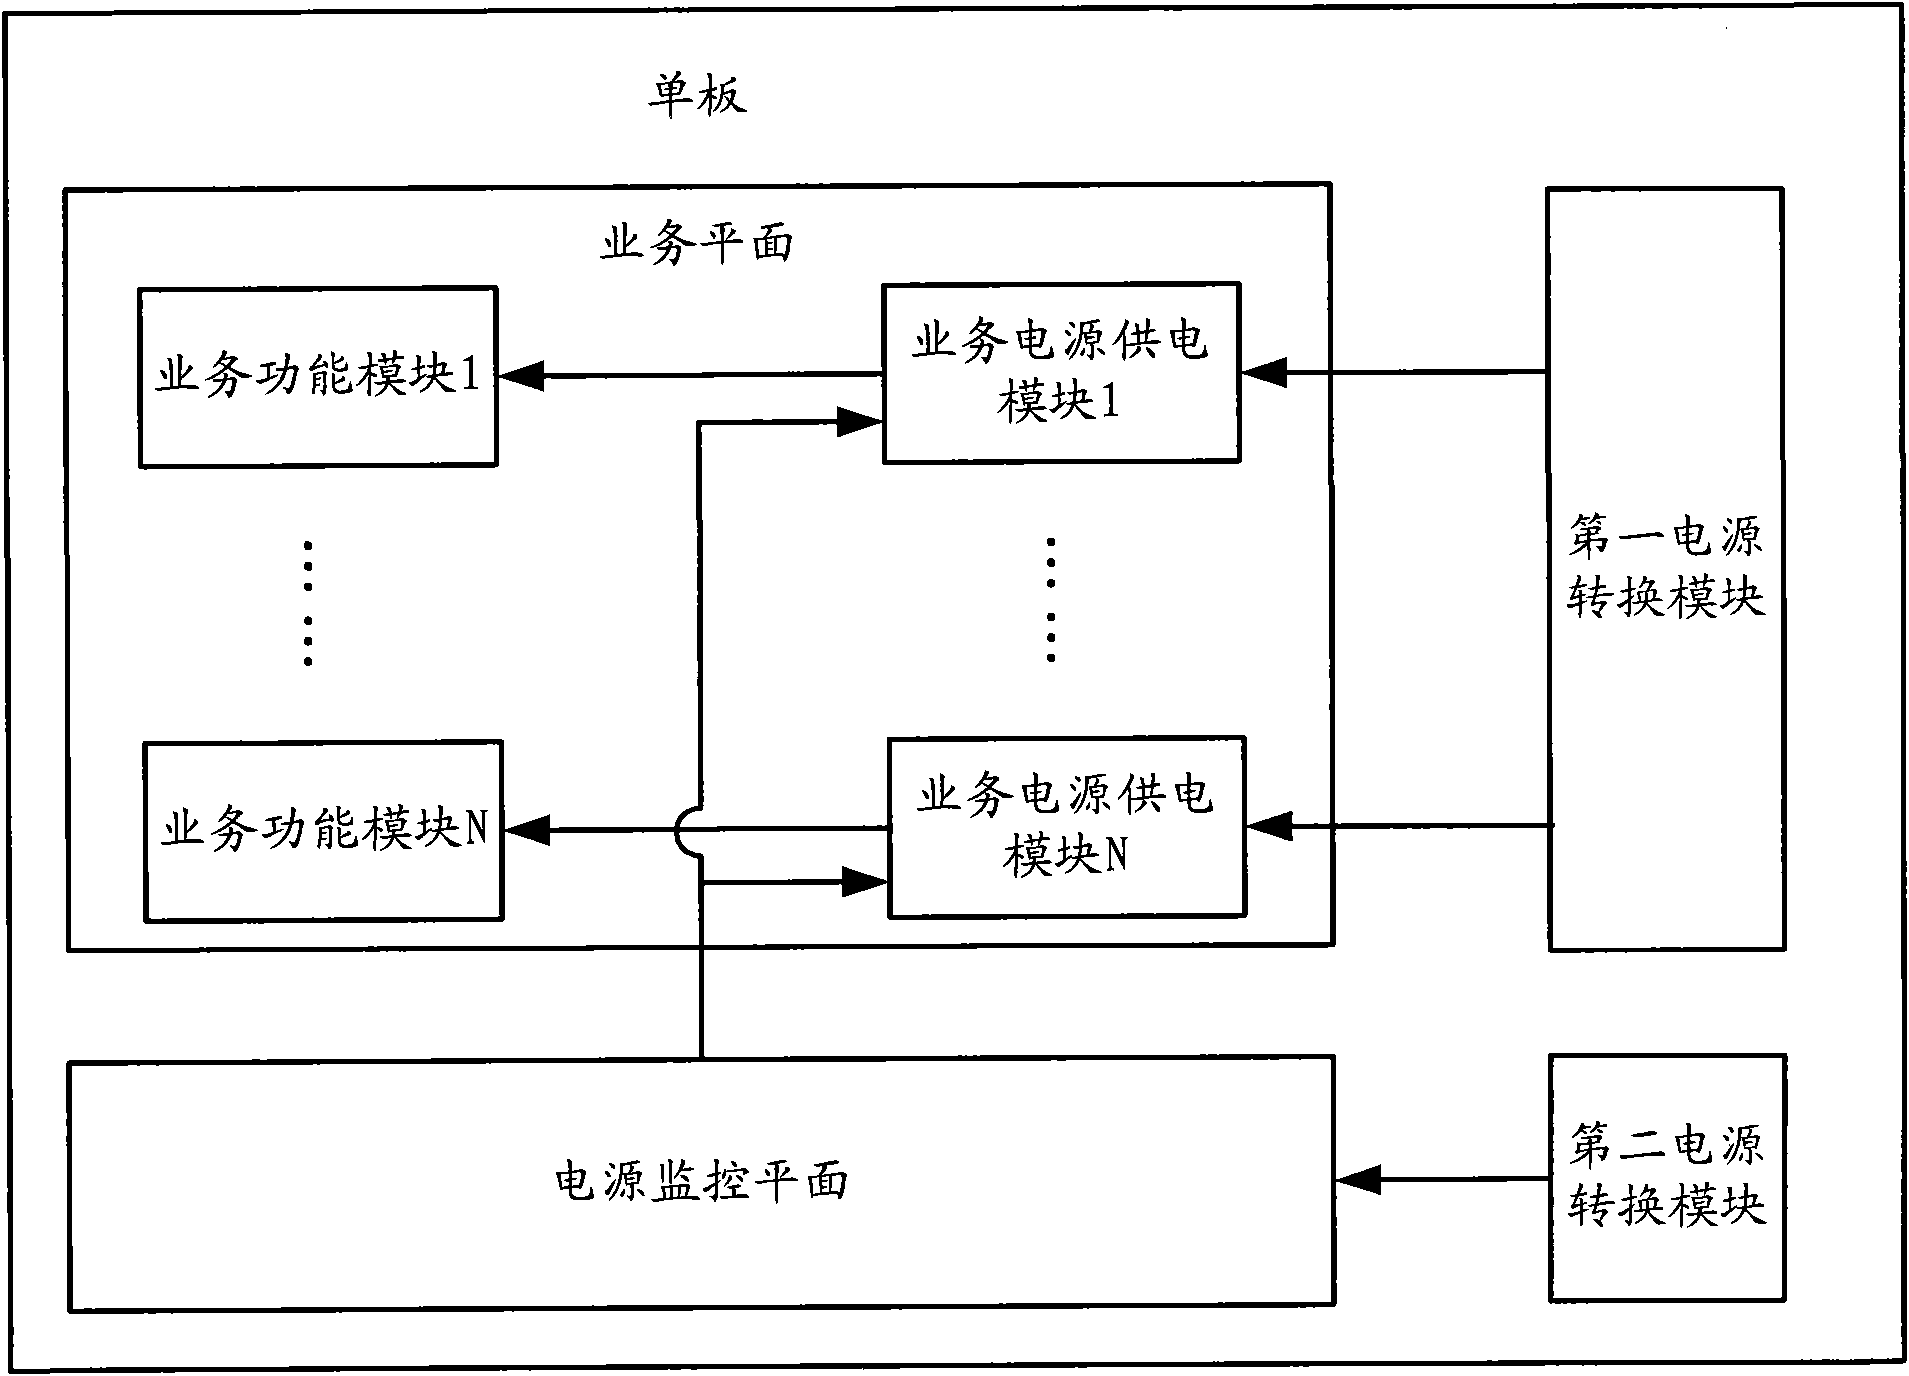 Single board and method for power monitoring in board